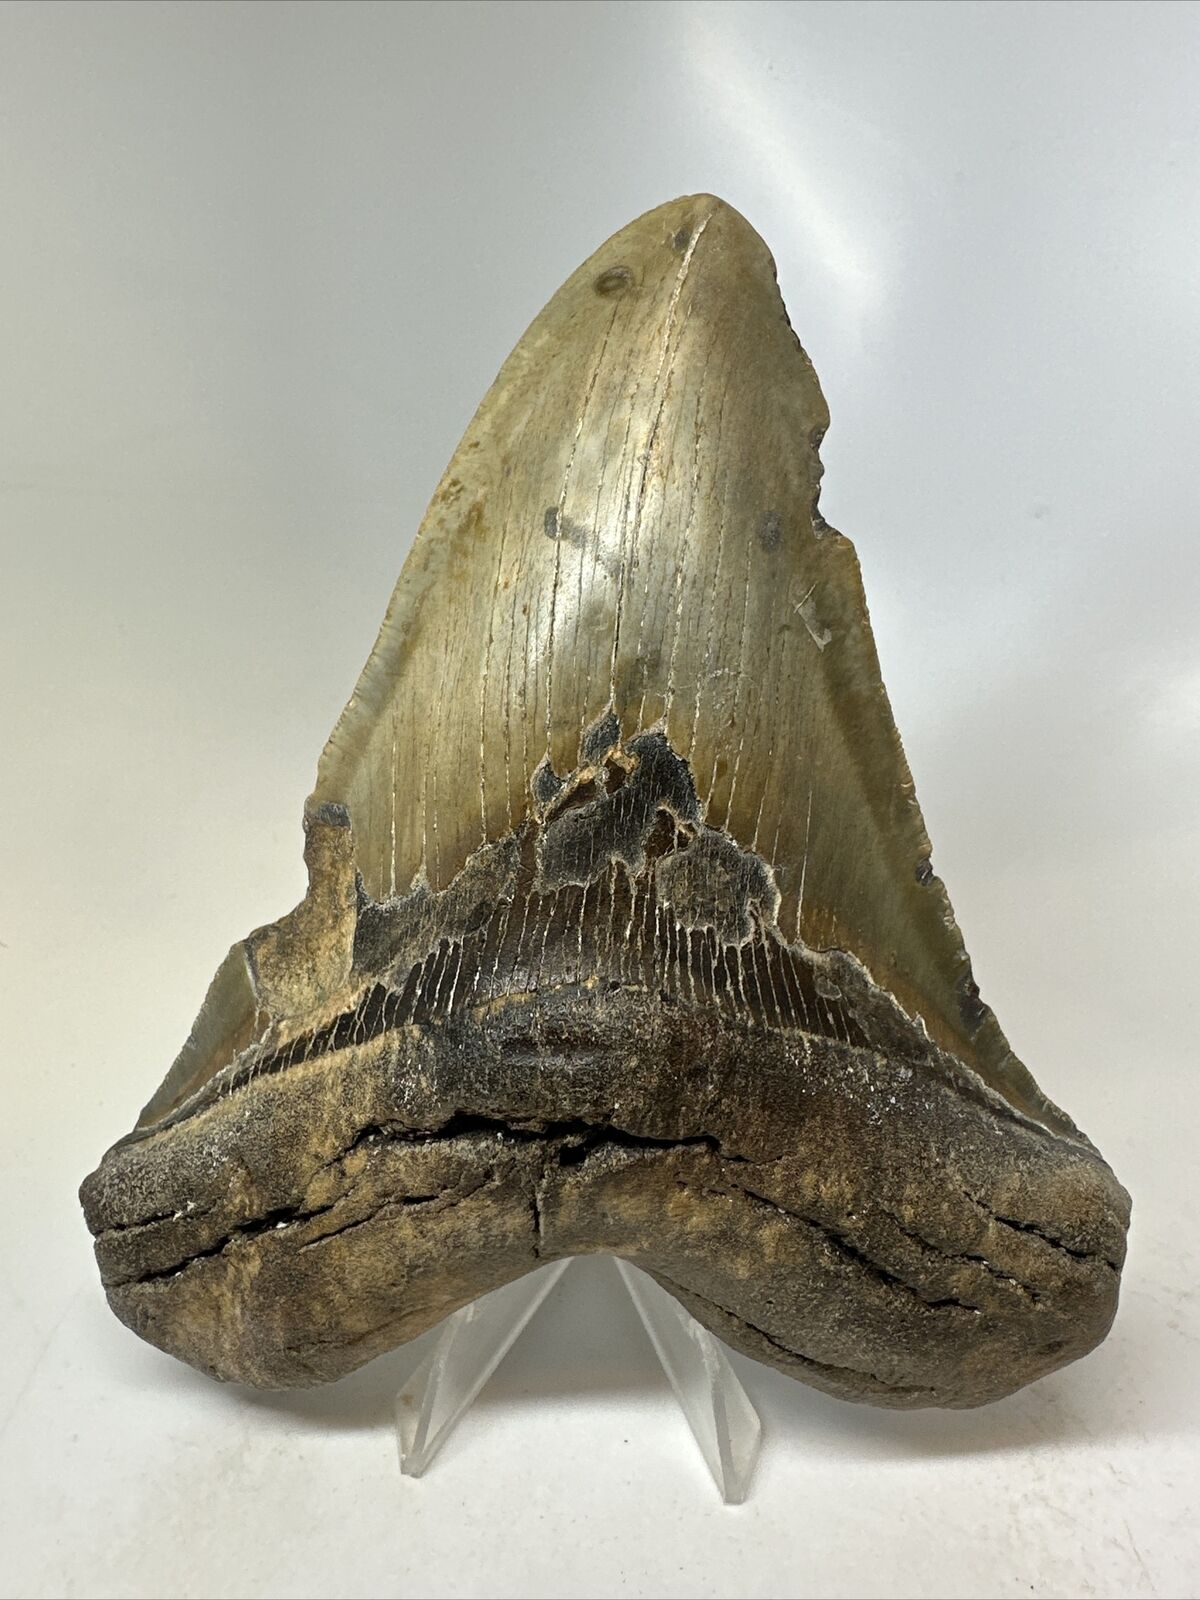 Megalodon Shark Tooth 5.90” Authentic - Natural Fossil - Carolina 15841